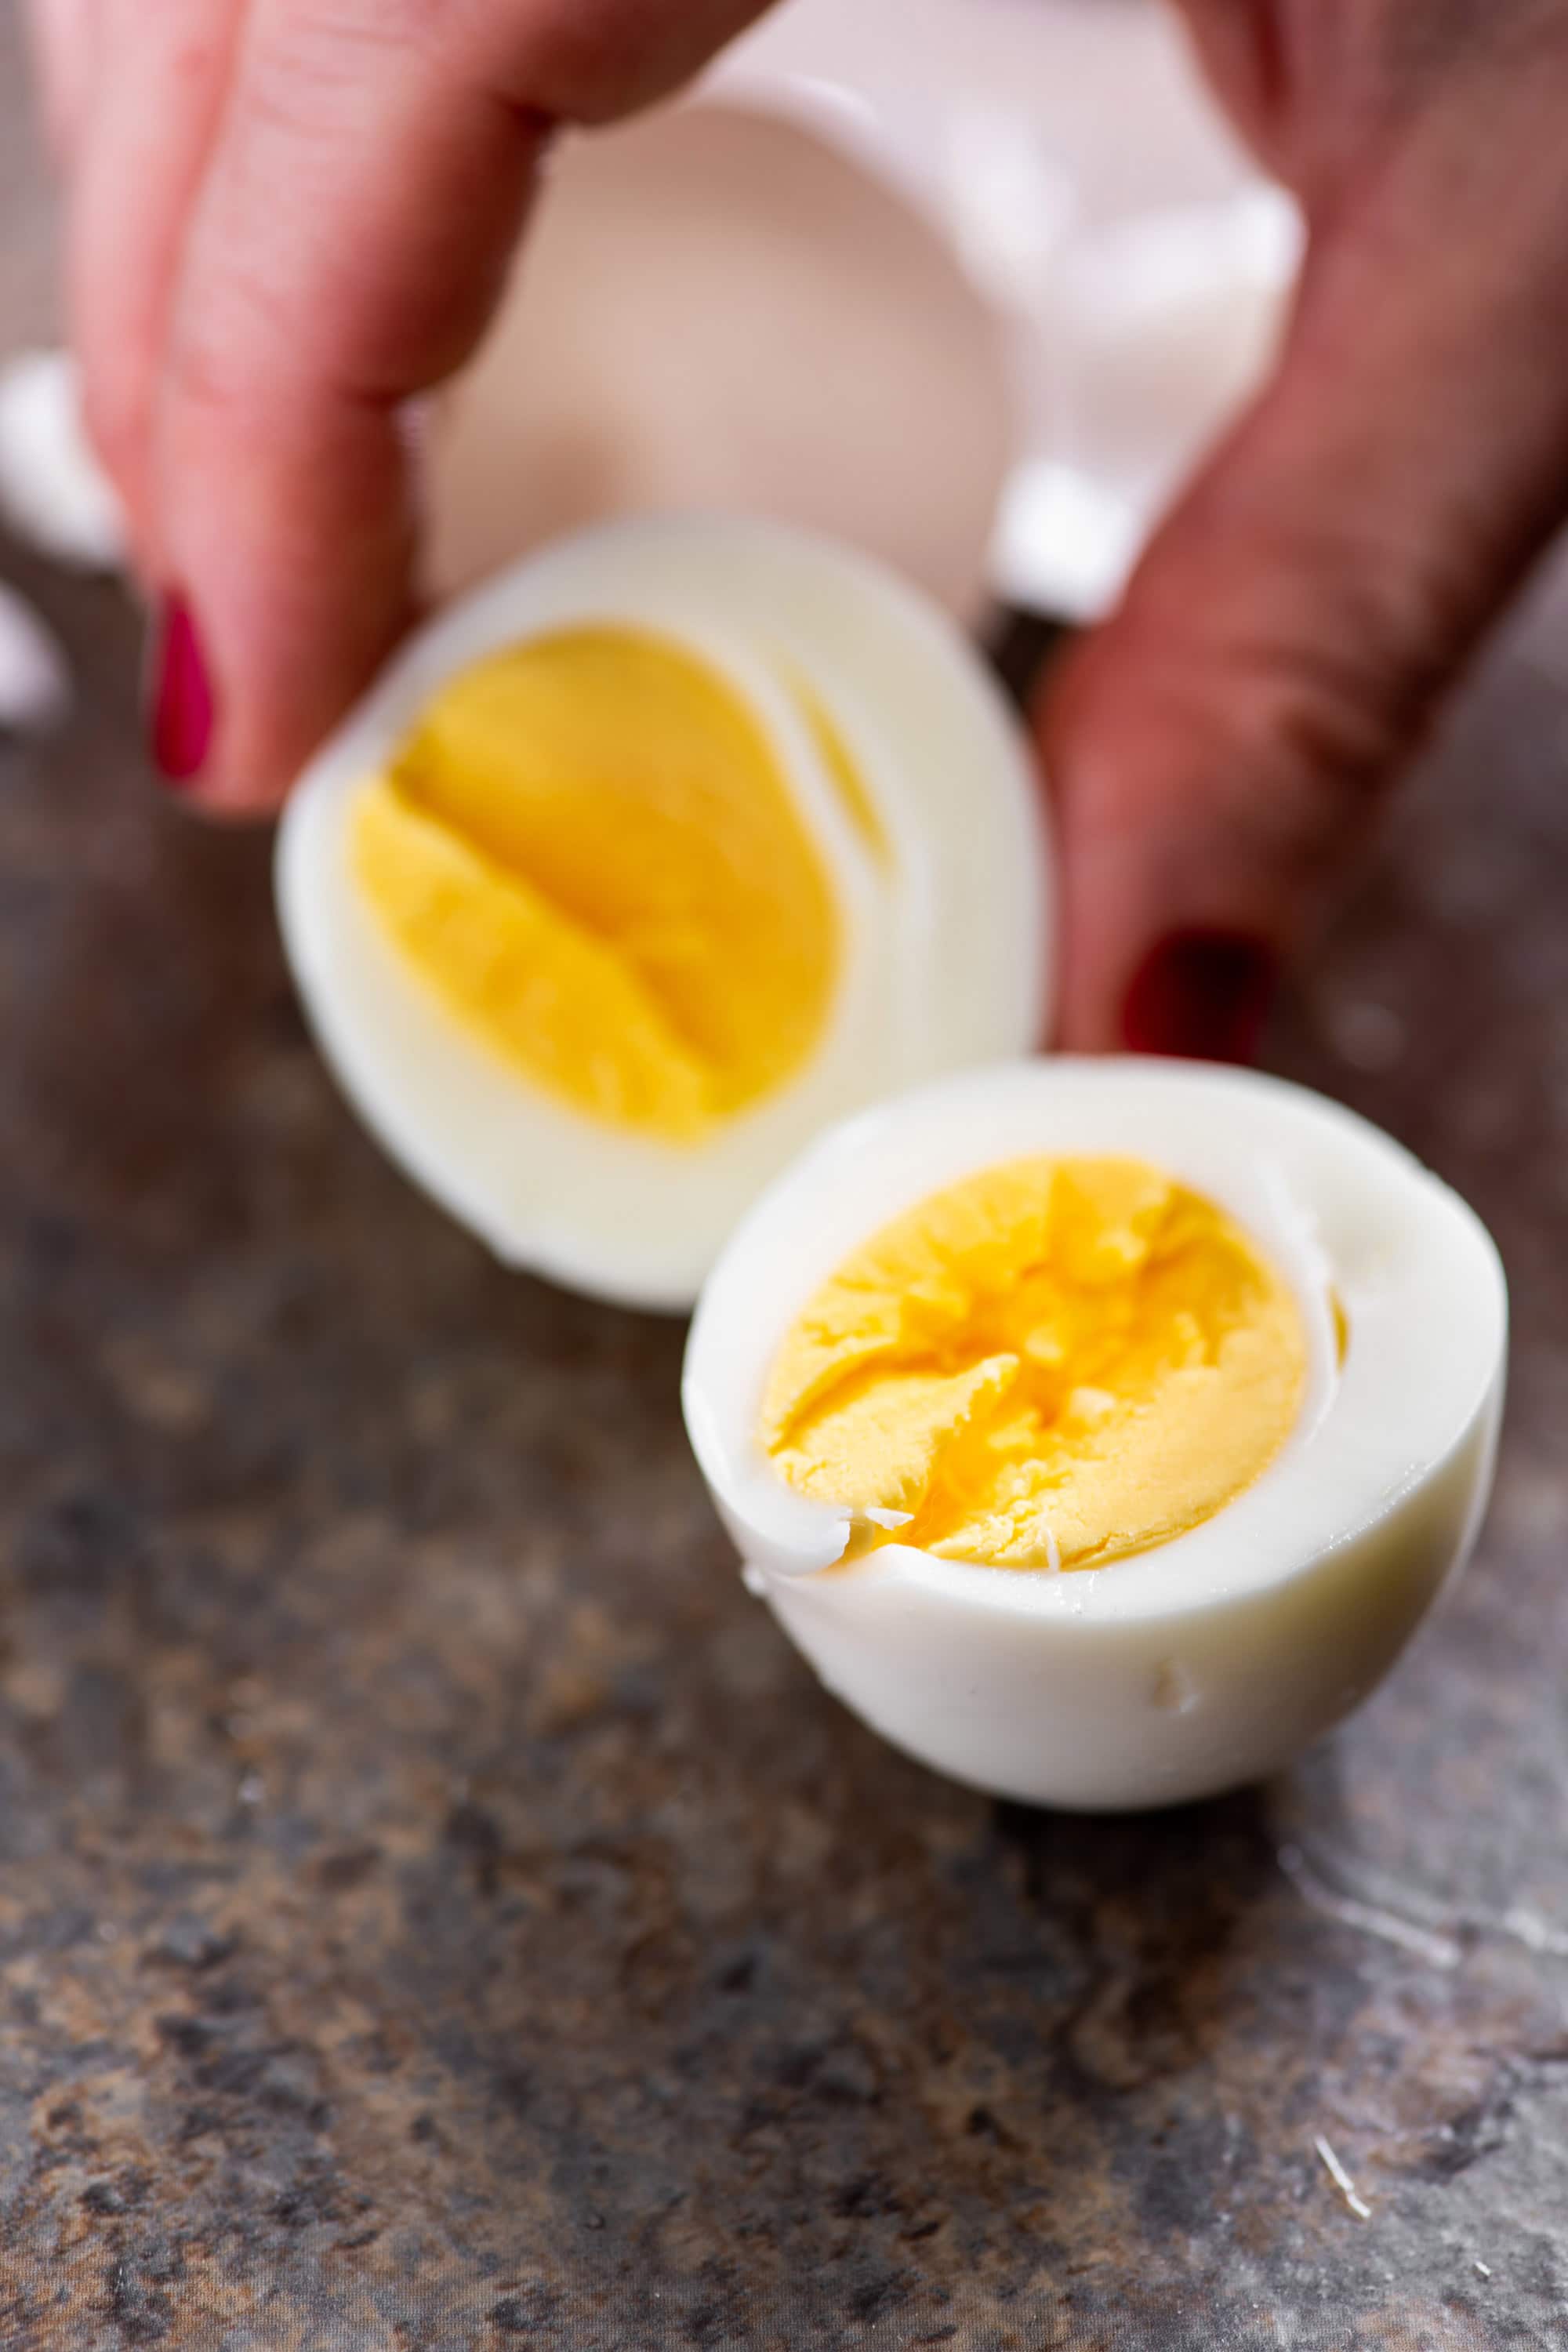 Perfectly cooked hard boiled egg cut in half.